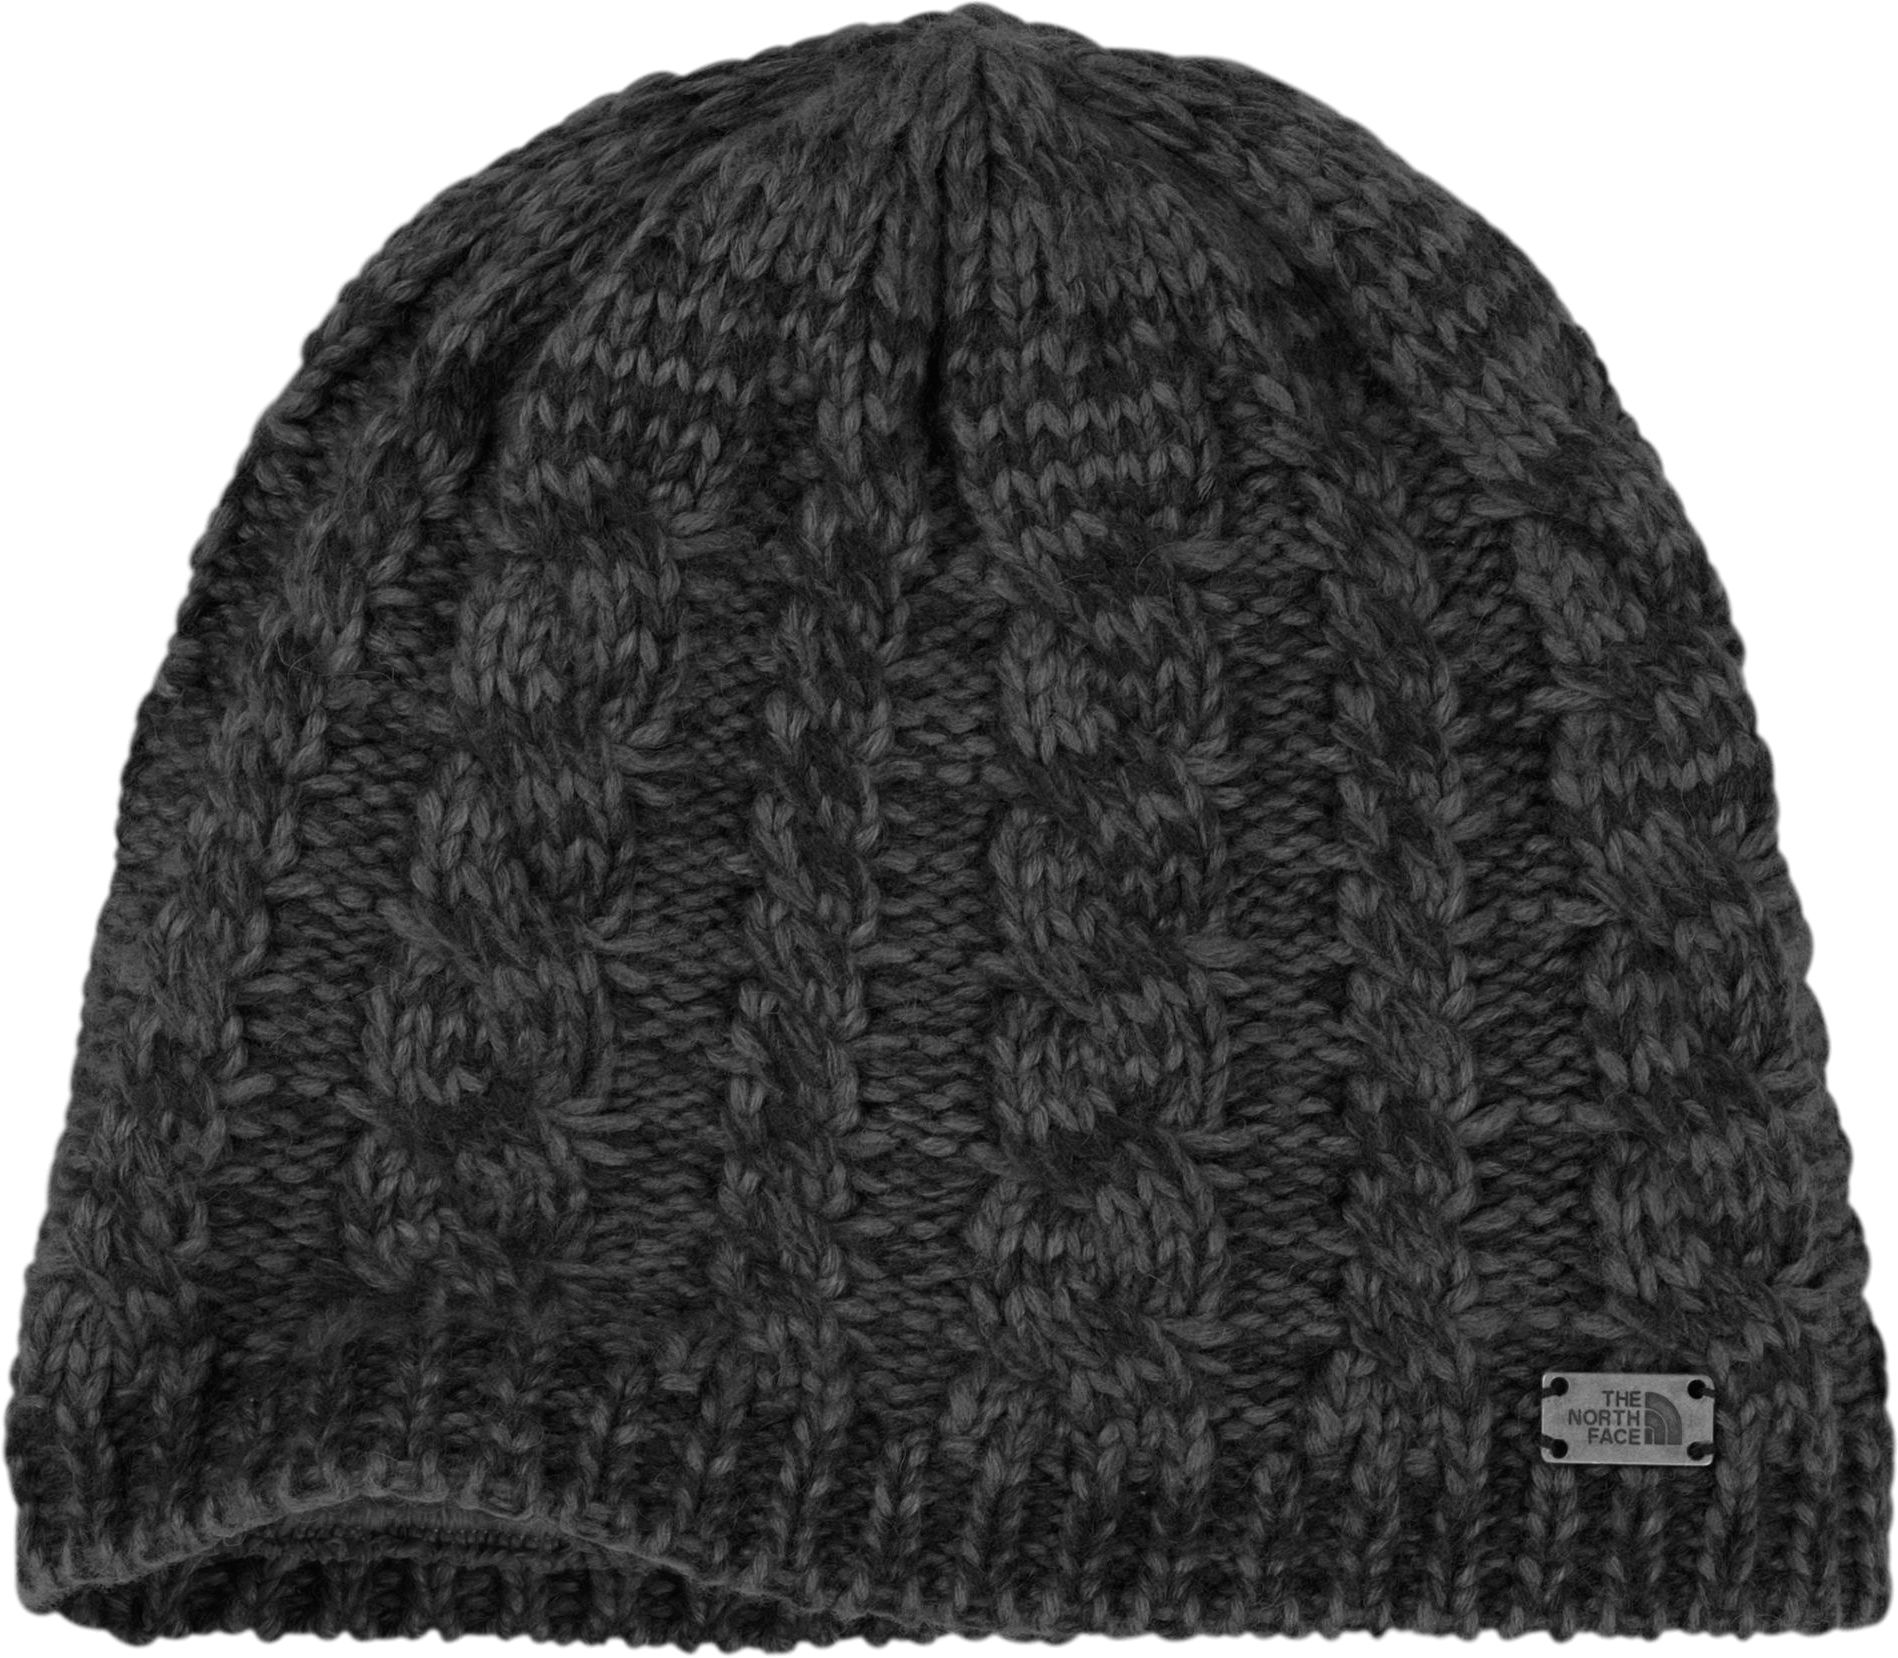 North Face Women's Fuzzy Cable Beanie 